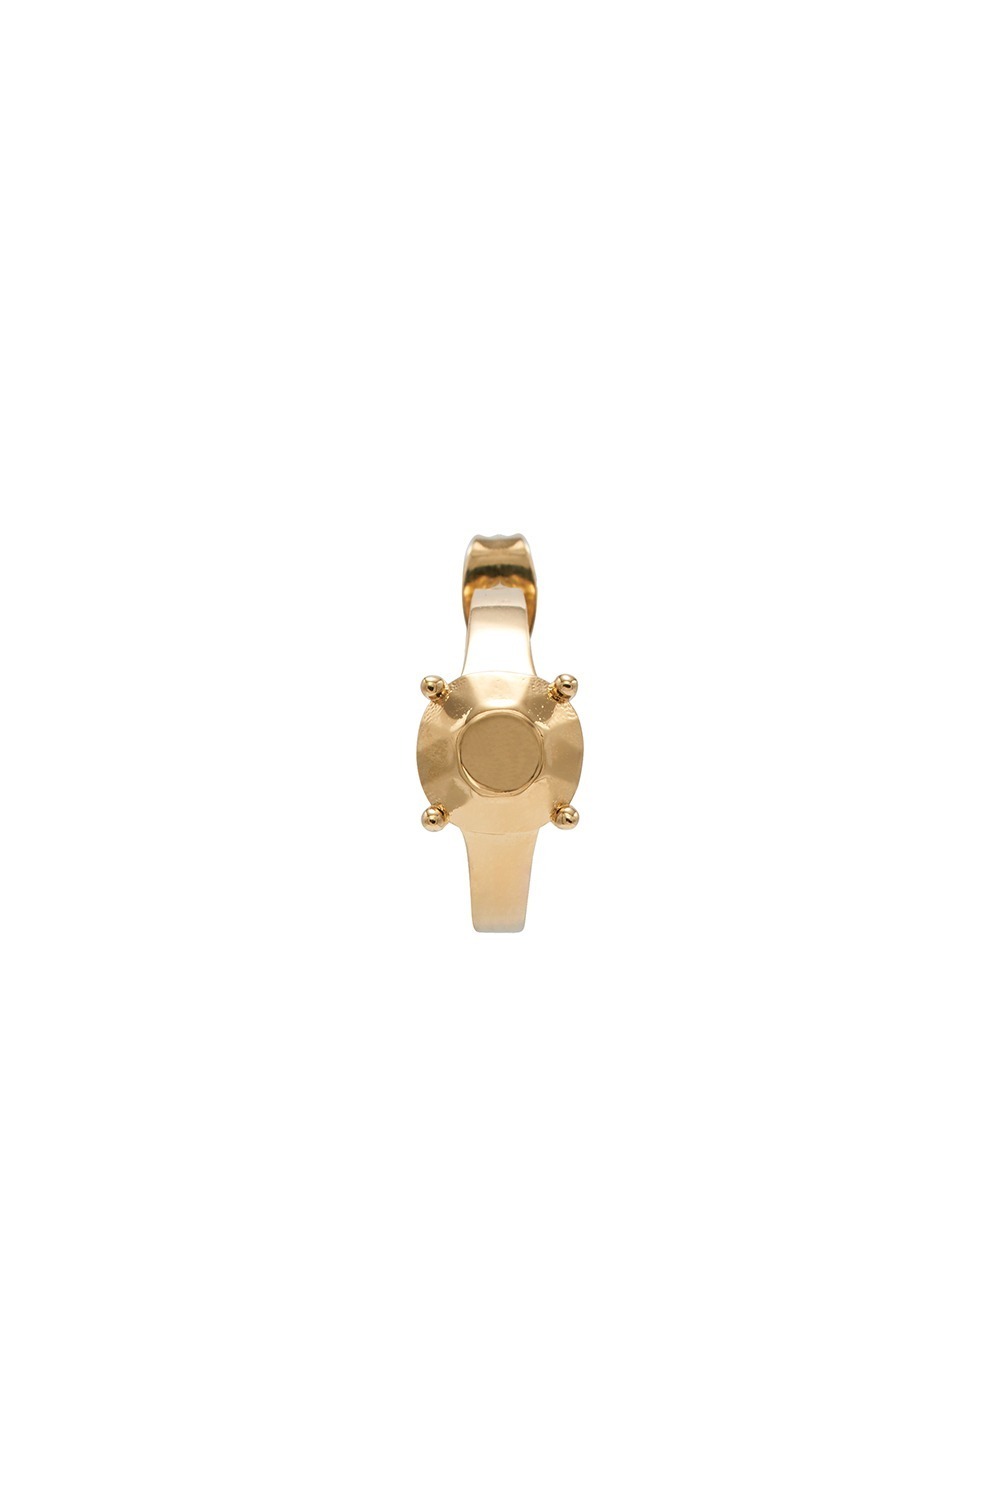 UNISEX SOLITAIRE RING EARRING GOLD